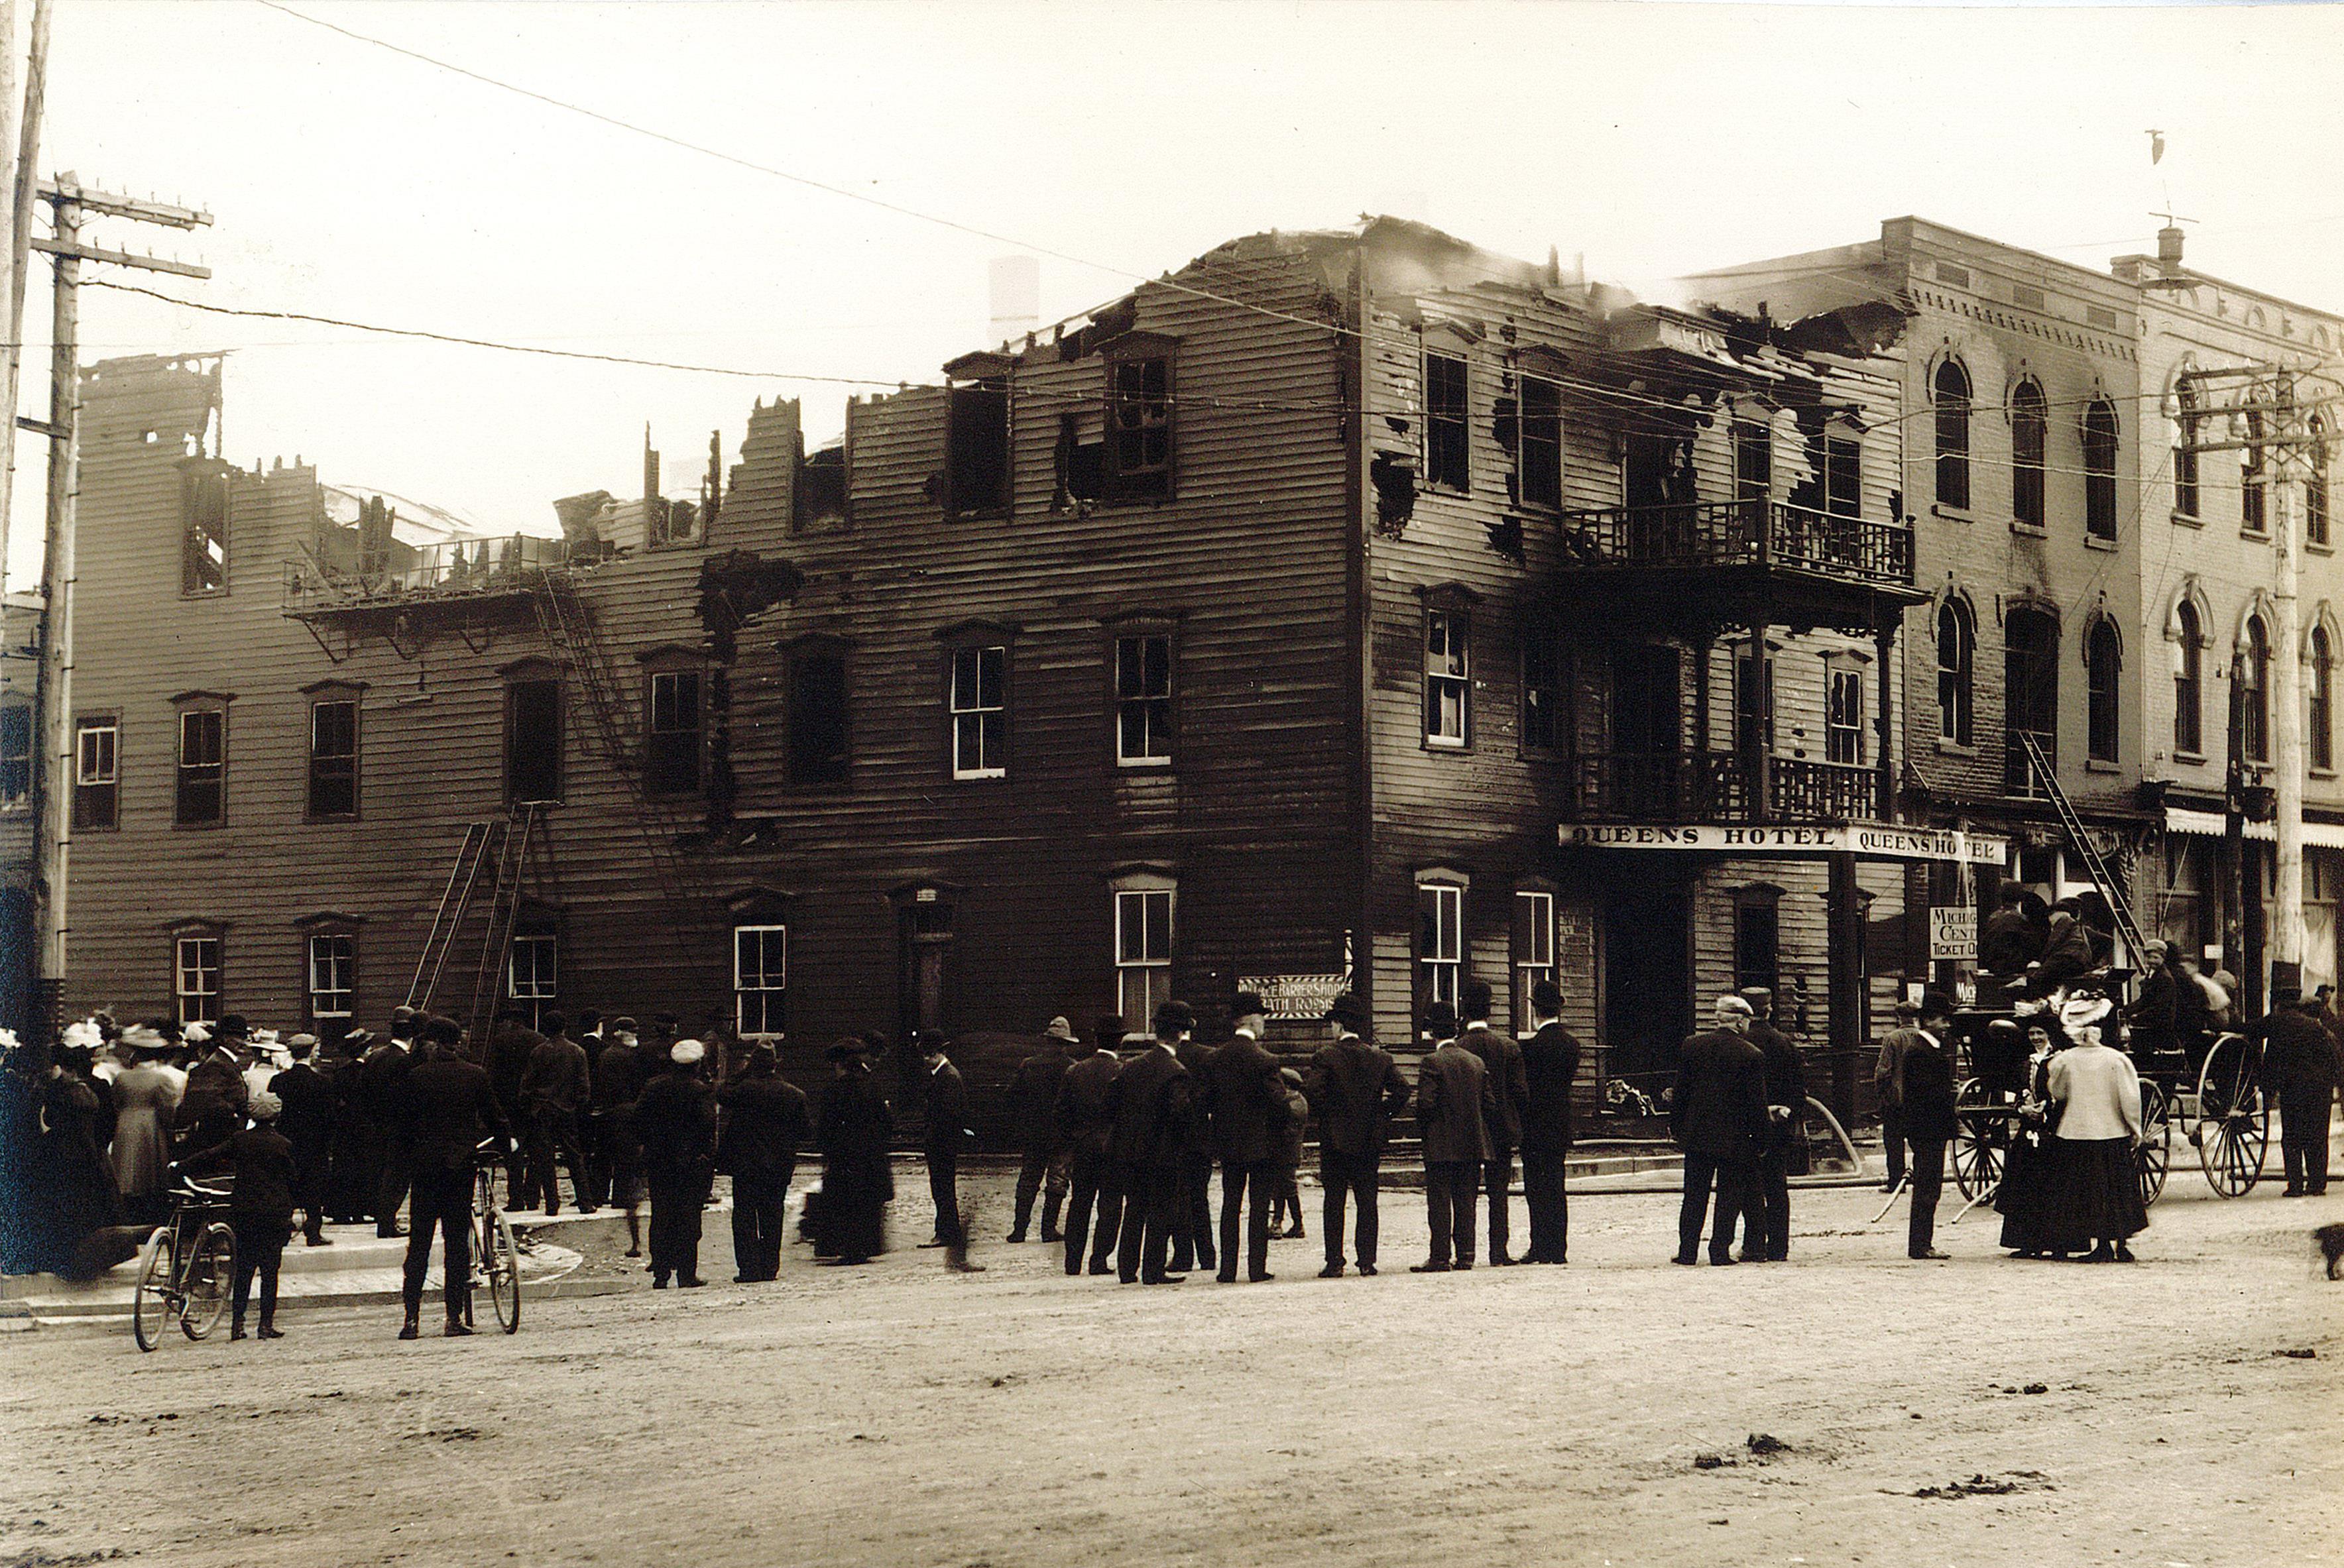 Photo of Queen's Hotel after a fire, top of building is missing. Smoke is escaping the interior of the building. A crowd observes the building from the street.